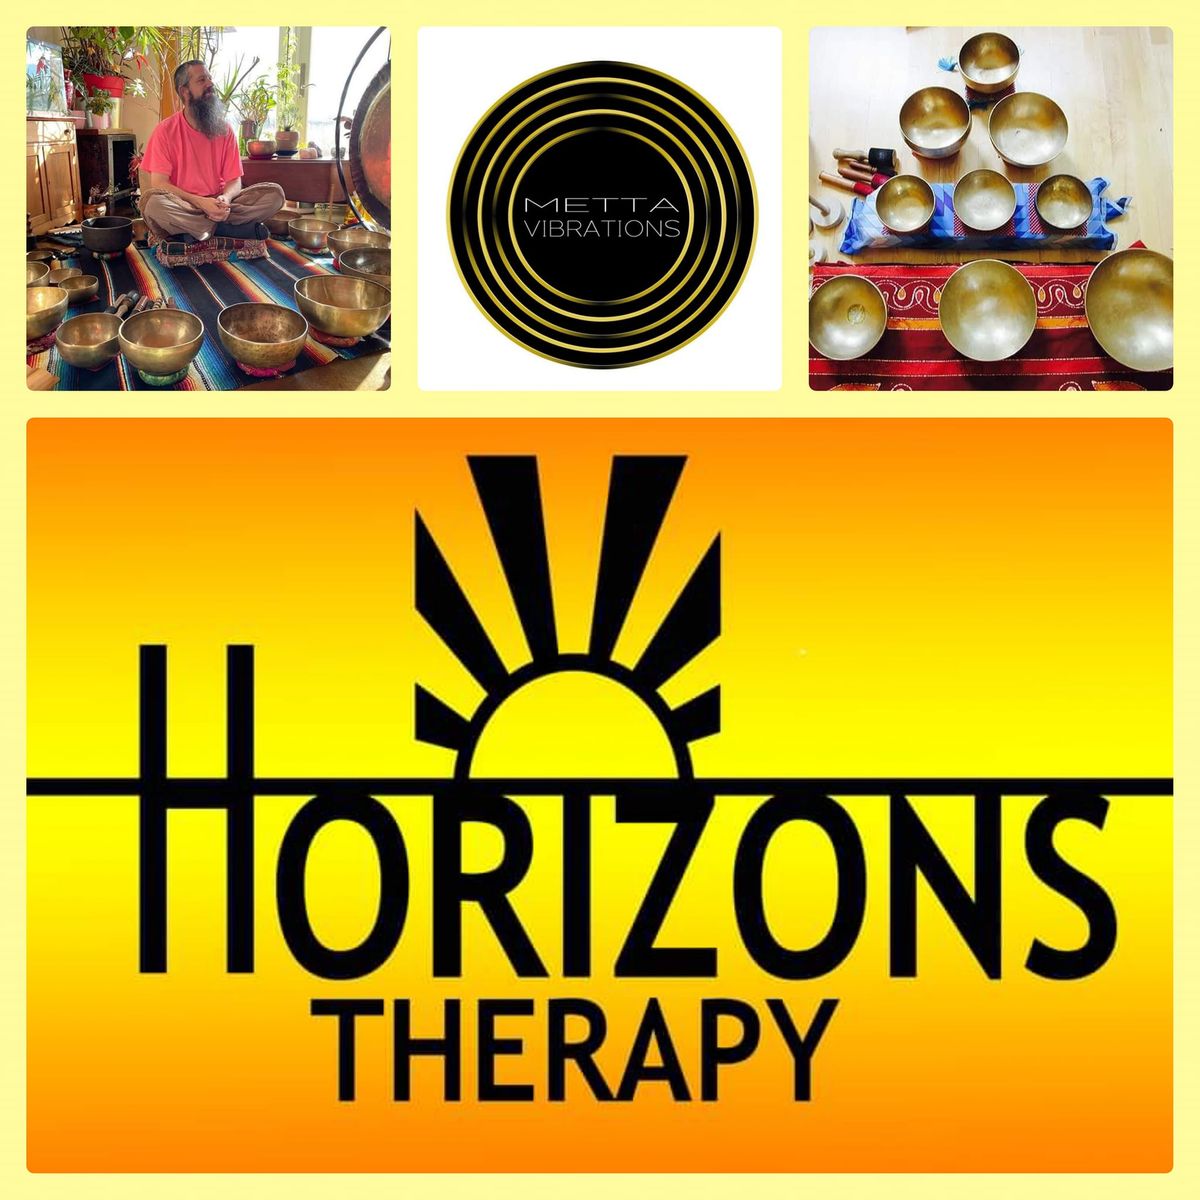 Sound Bath Experience at Horizons Therapy 